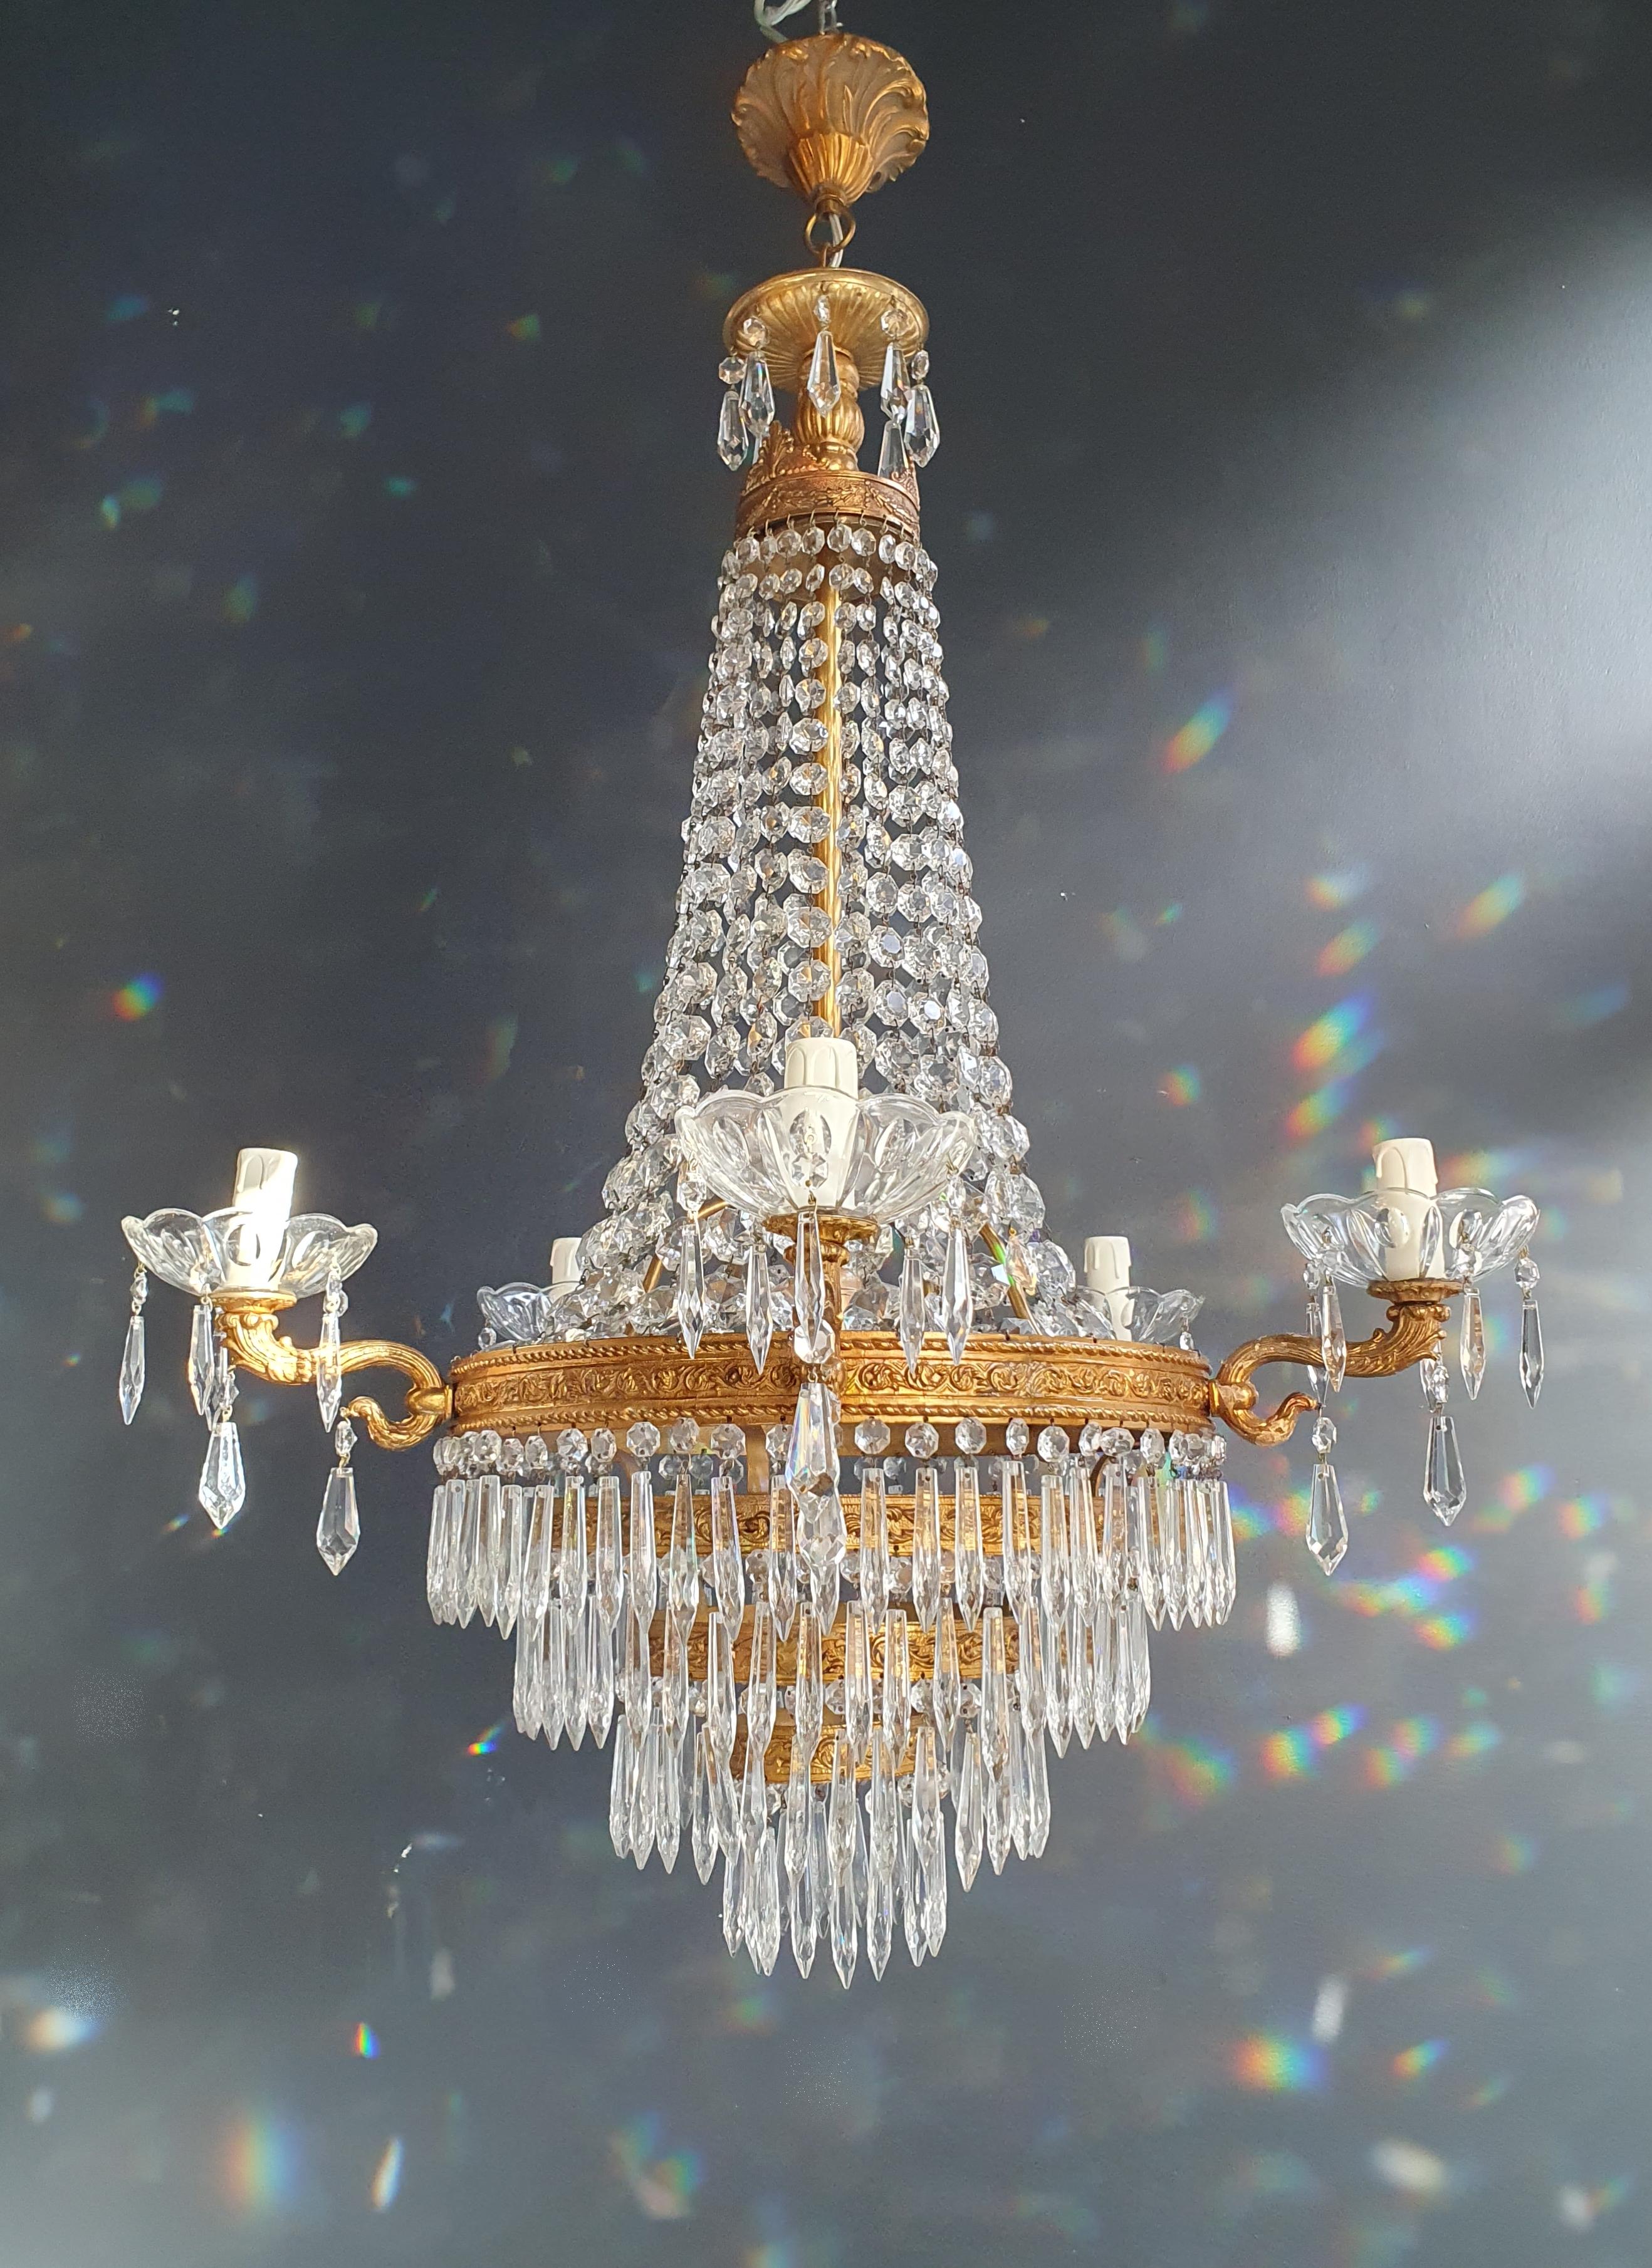 Empire Brass Sac a Pearl Chandelier Crystal Lustre Ceiling Antique 2